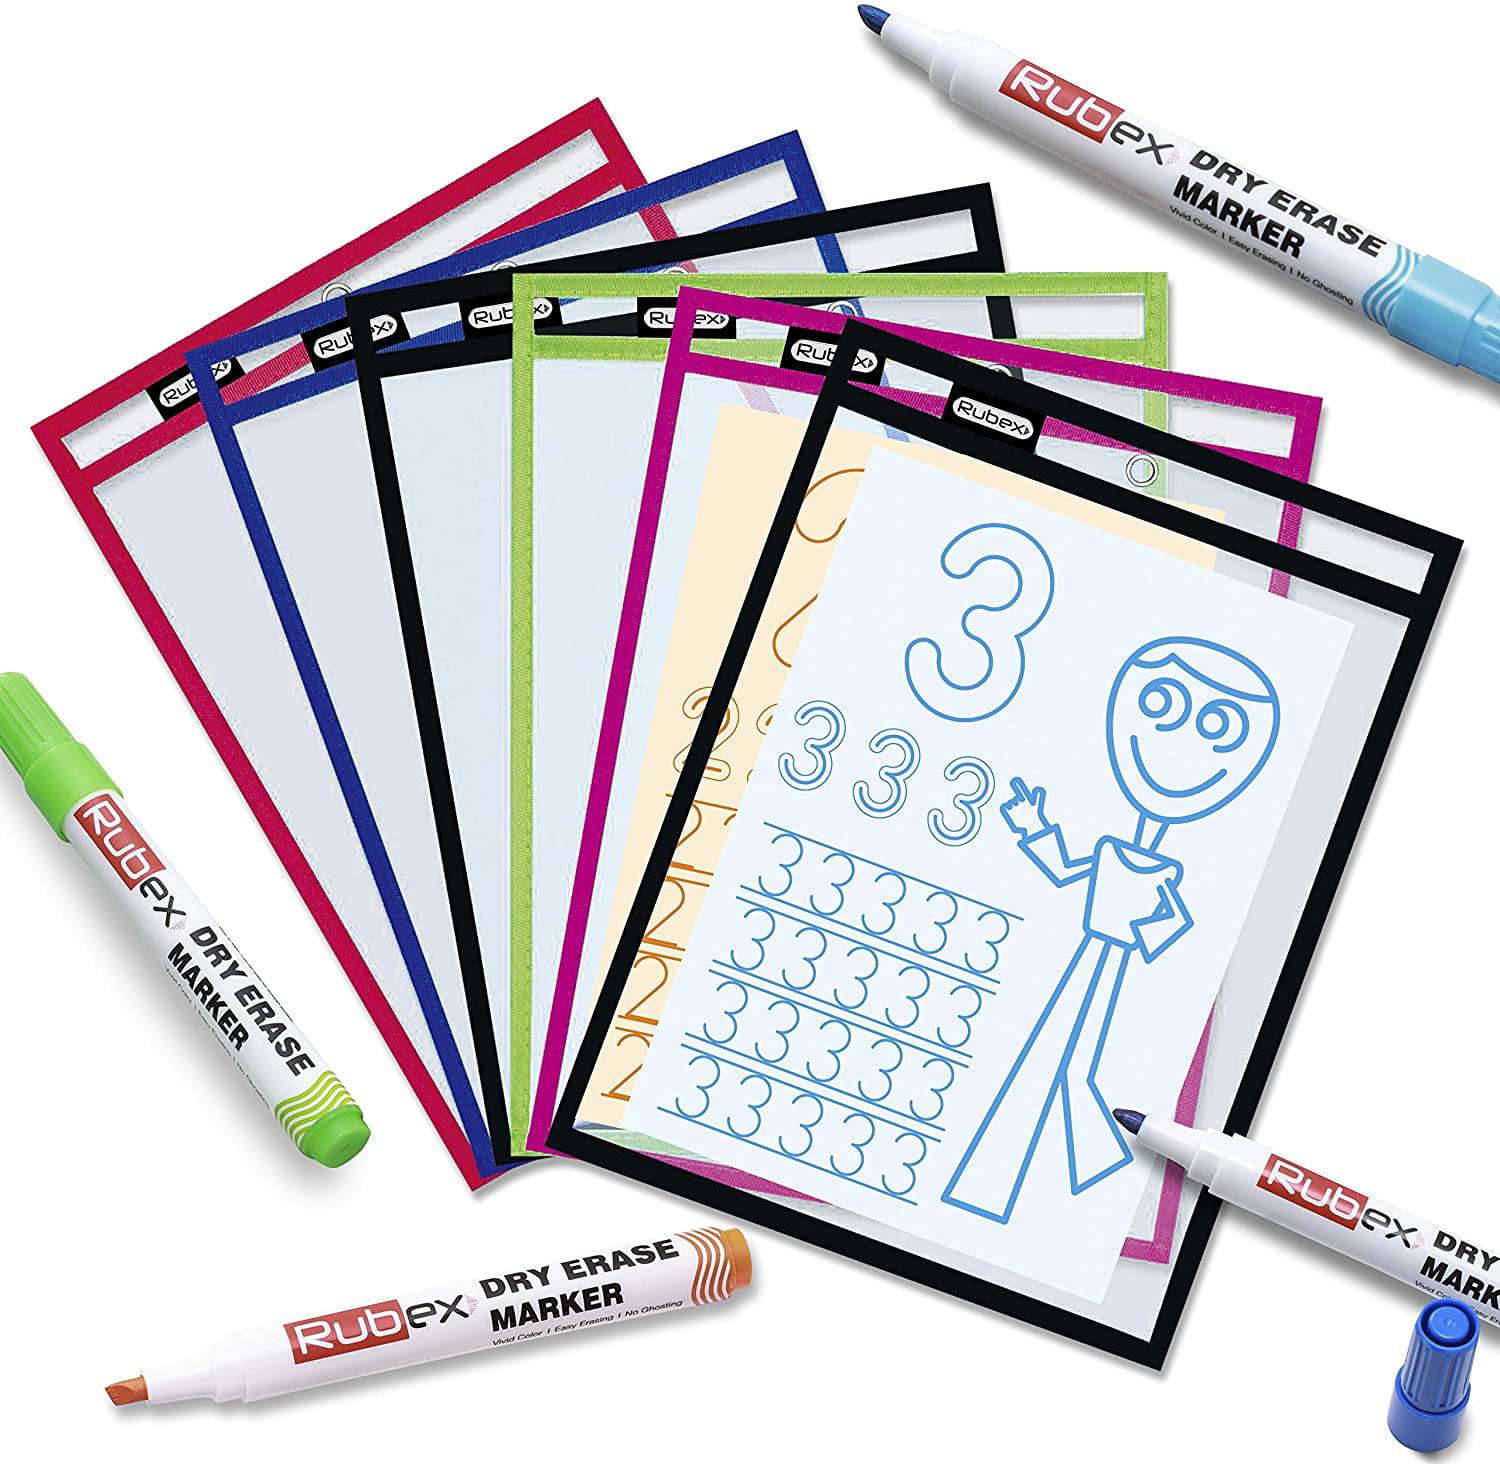 Dry Erase Pockets Black - Write and Wipe Pockets // Bluestone Brands // Clear Reusable Sleeves 30 Pack - Job Ticket Holders 9 x 12 Dry Erase Sheets